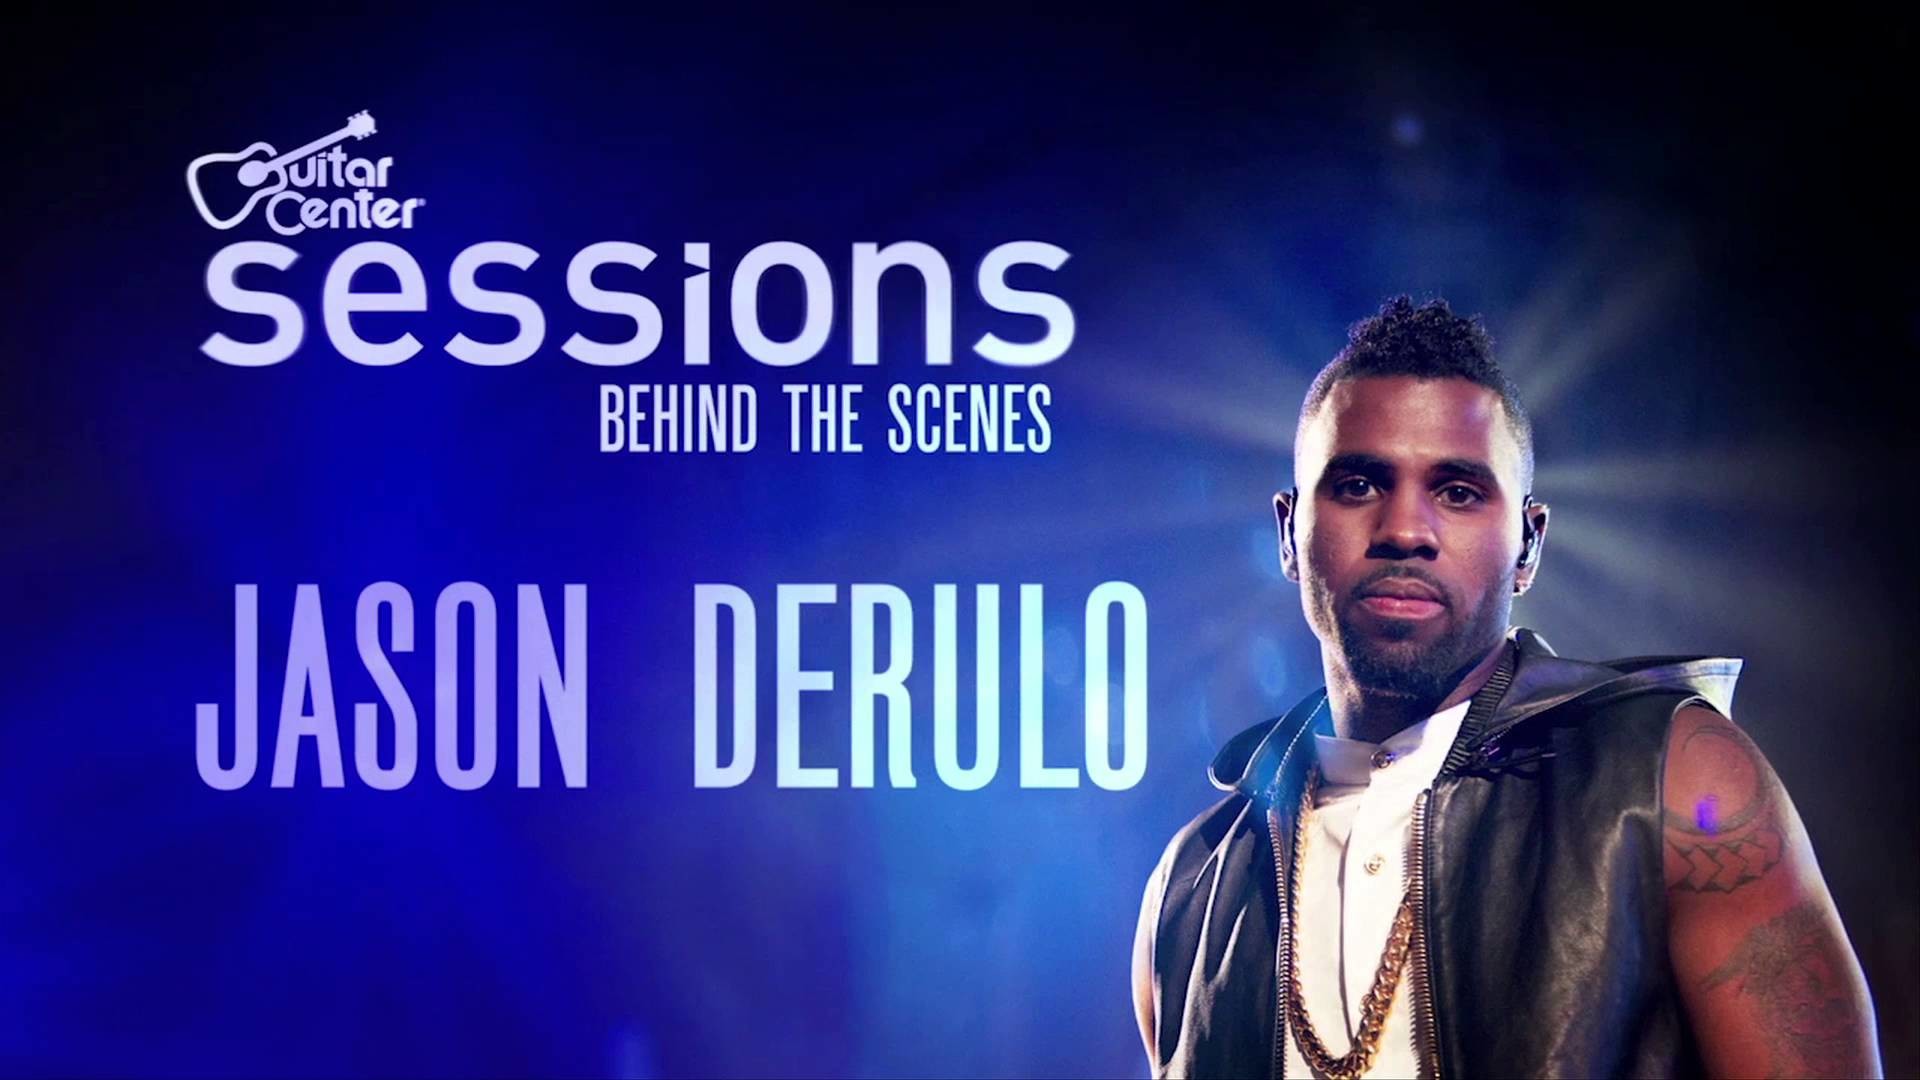 1920x1080 Jason Derulo, Behind the Scenes, Guitar Center Sessions